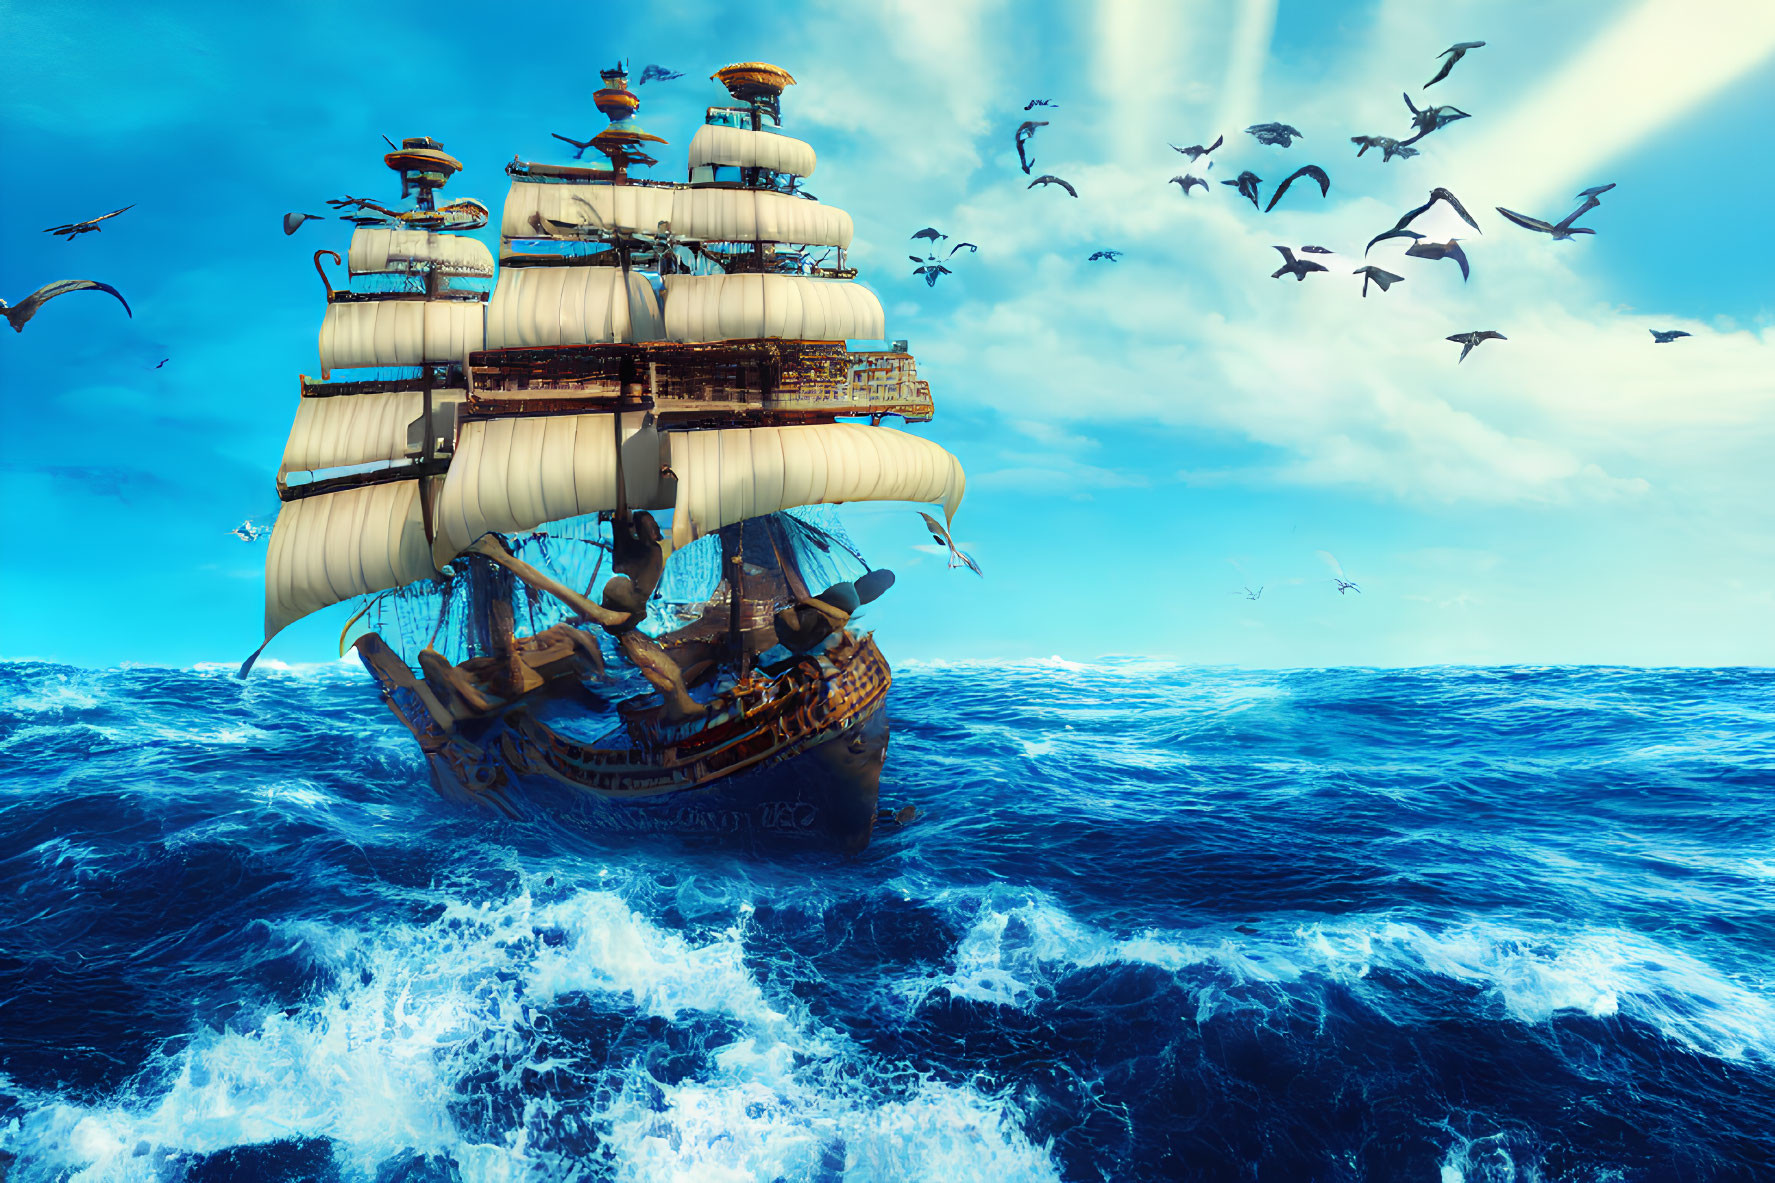 Sailing ship with white sails on deep blue ocean with seagulls in partly cloudy sky